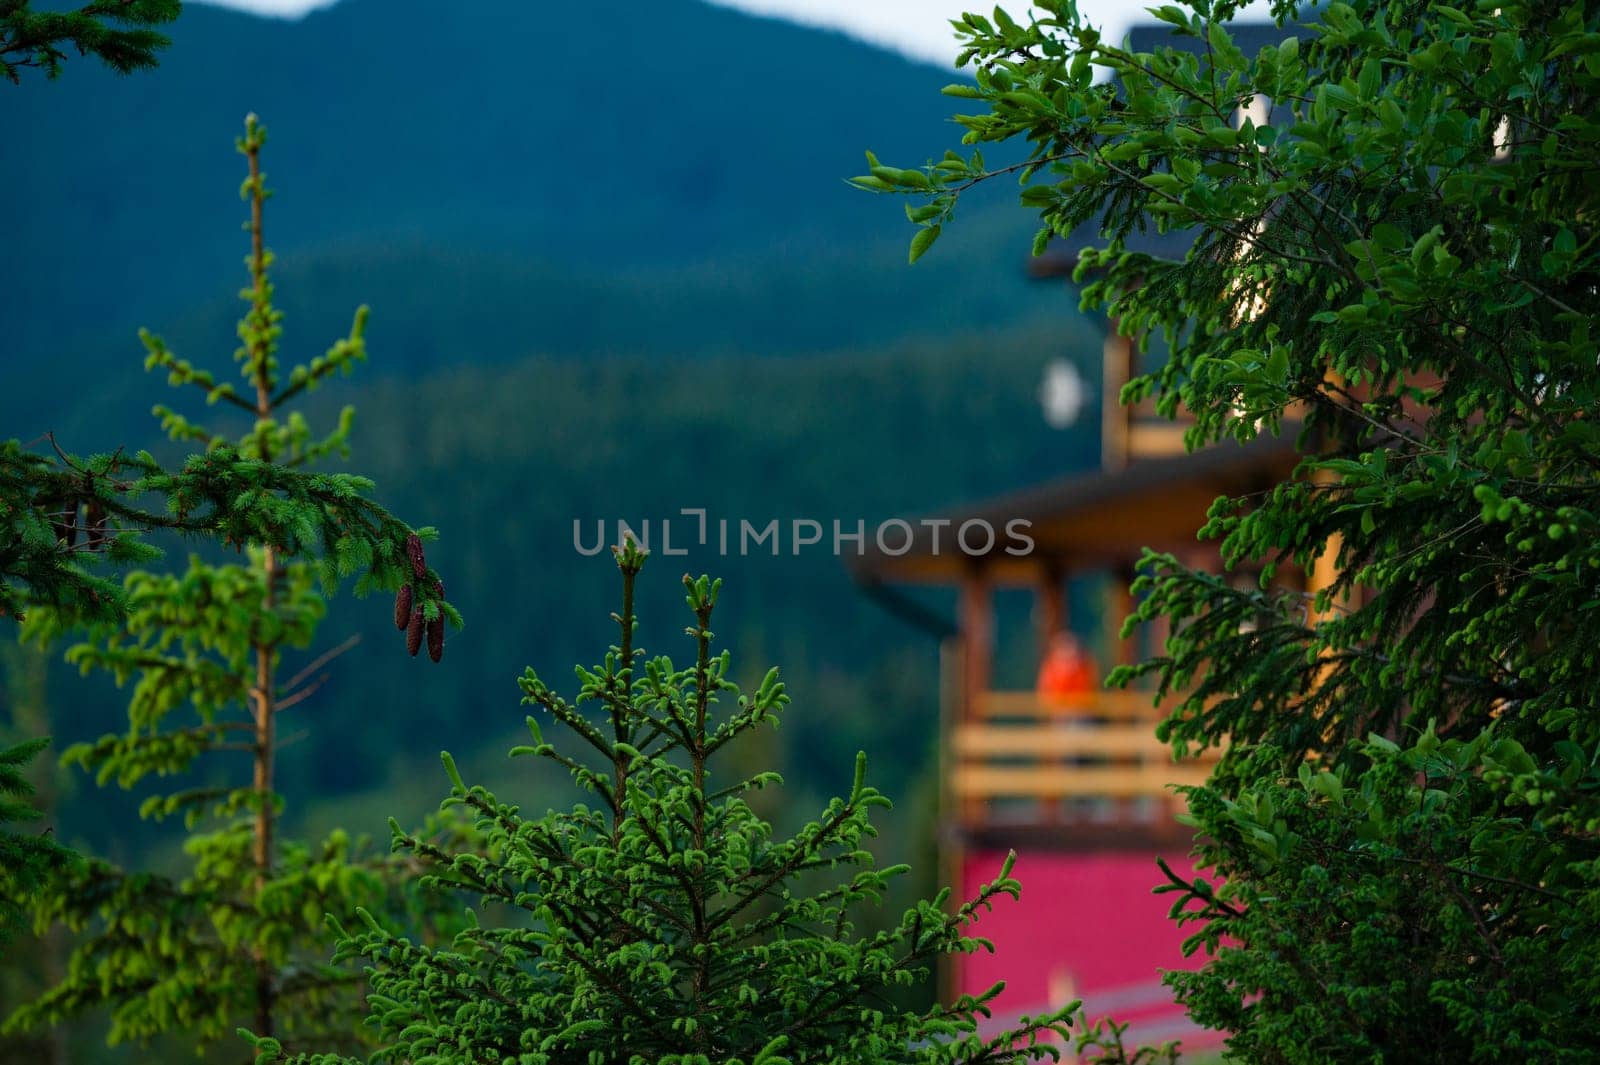 Blurred person silhouette in an orange jacket stands on the terrace of a wooden house against the background of mountains by Niko_Cingaryuk